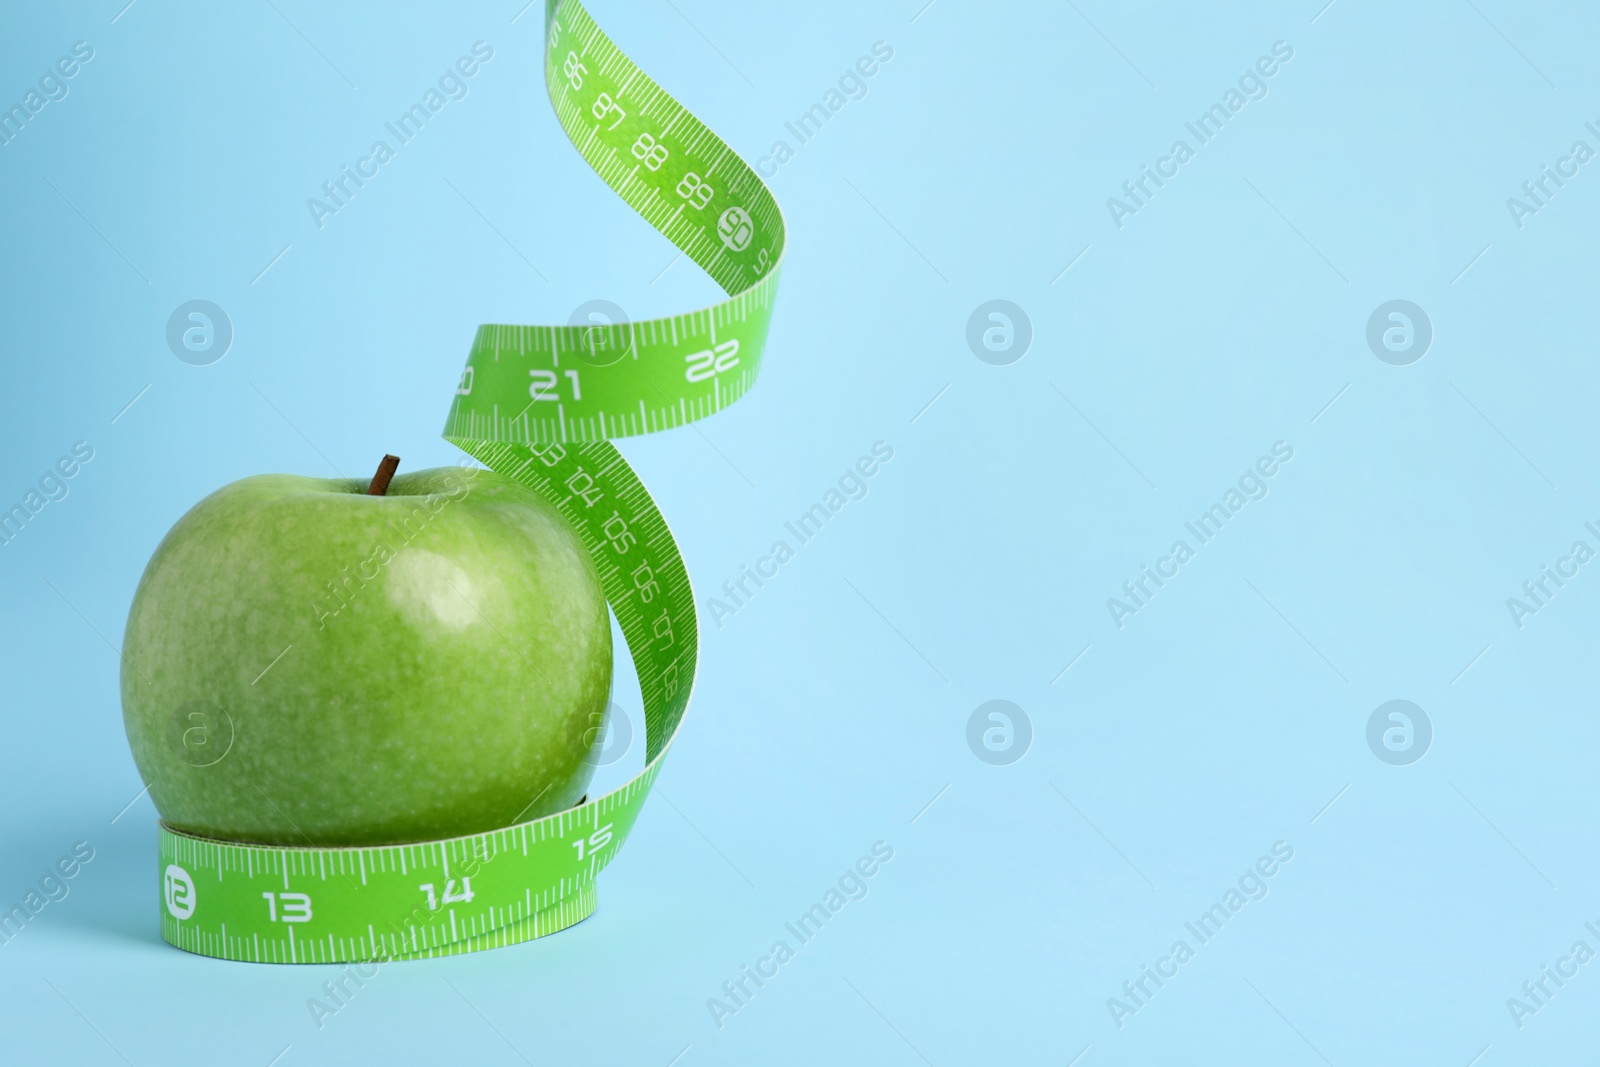 Photo of Ripe green apple and measuring tape on light blue background. Space for text